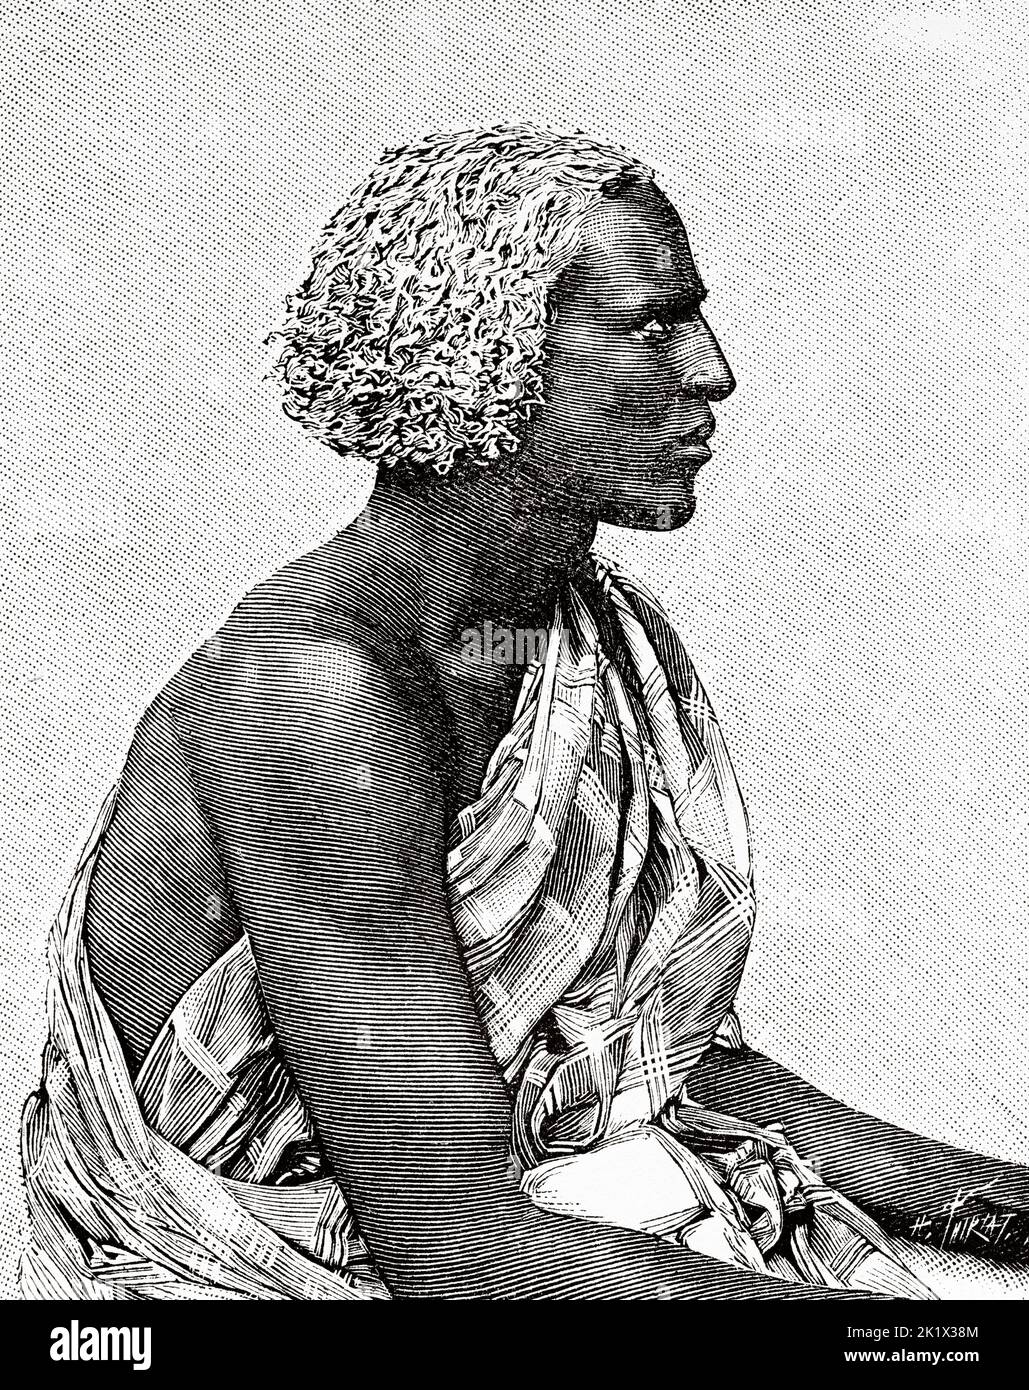 Farrach Aden, 20-year-old Somali people exposed in the Jardin d'Acclimatation in Paris, France. Old 19th century engraved illustration from La Nature 1890 Stock Photo